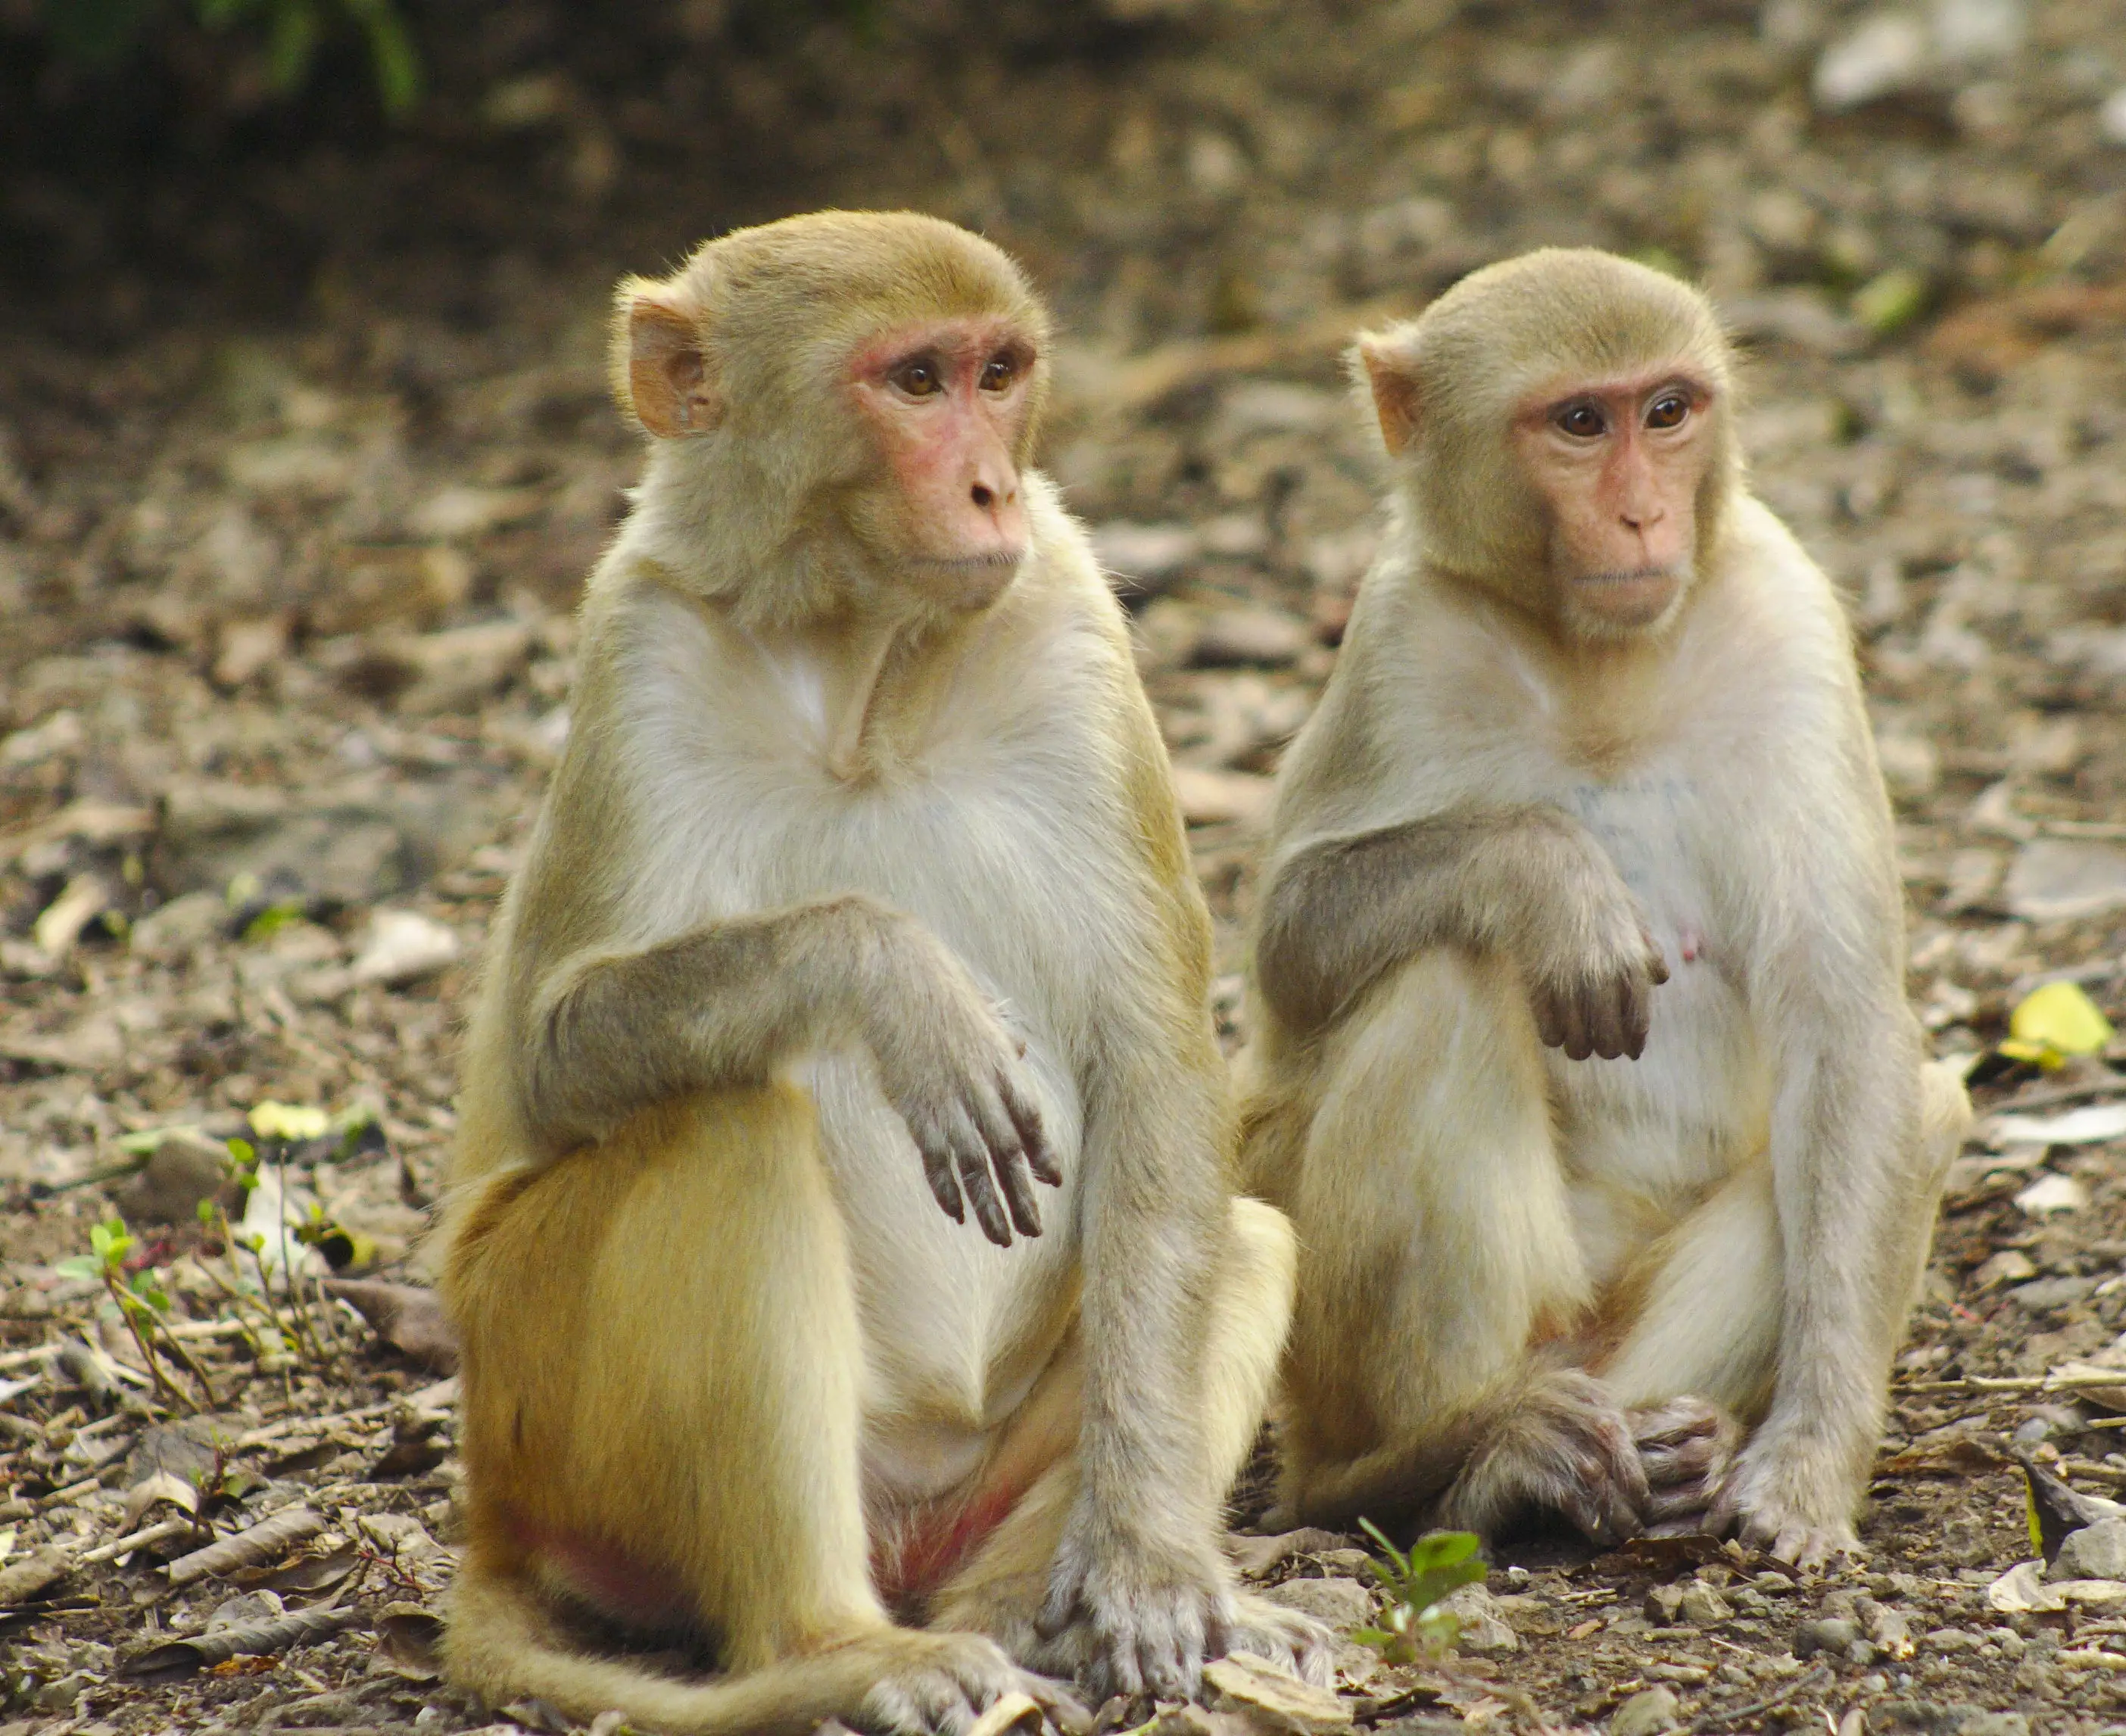 More than 2,400 rhesus macaques were infected with a strain of coronavirus.